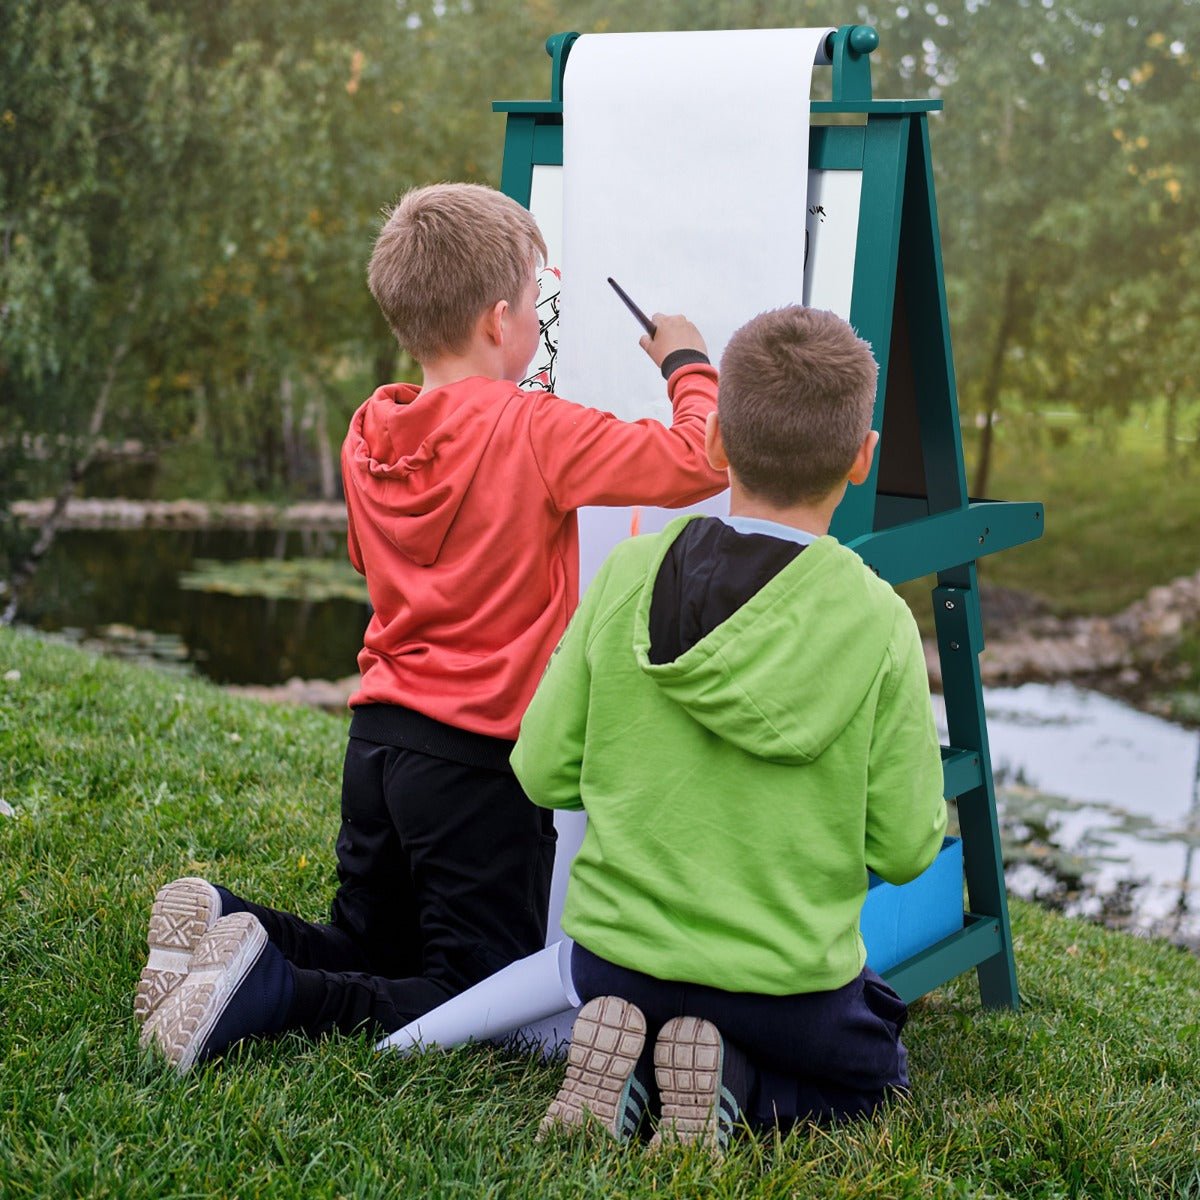 Rediscover Creativity with the Teal Blue Easel - Order Now!